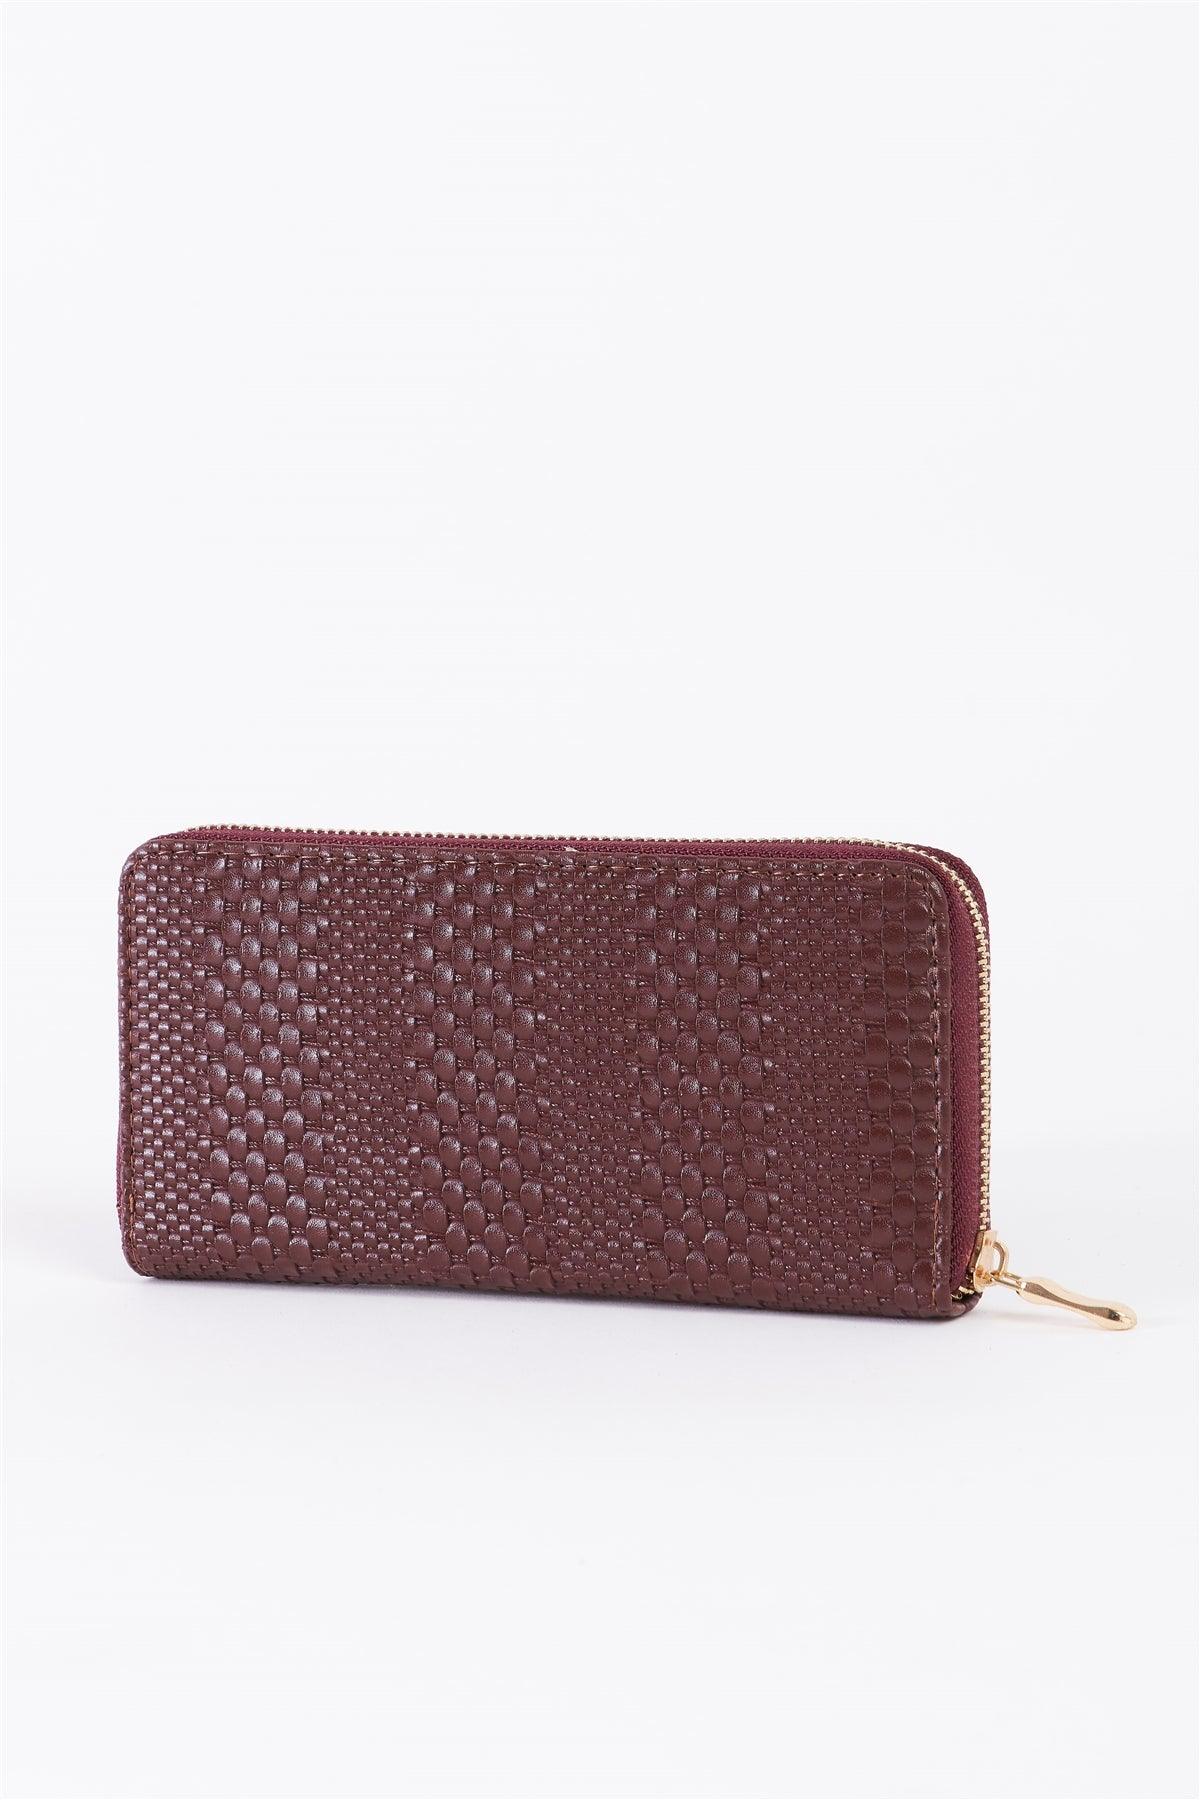 Taupe Mahogany Woven Texture Vegan Leather Zipper Wallet /3 Piece